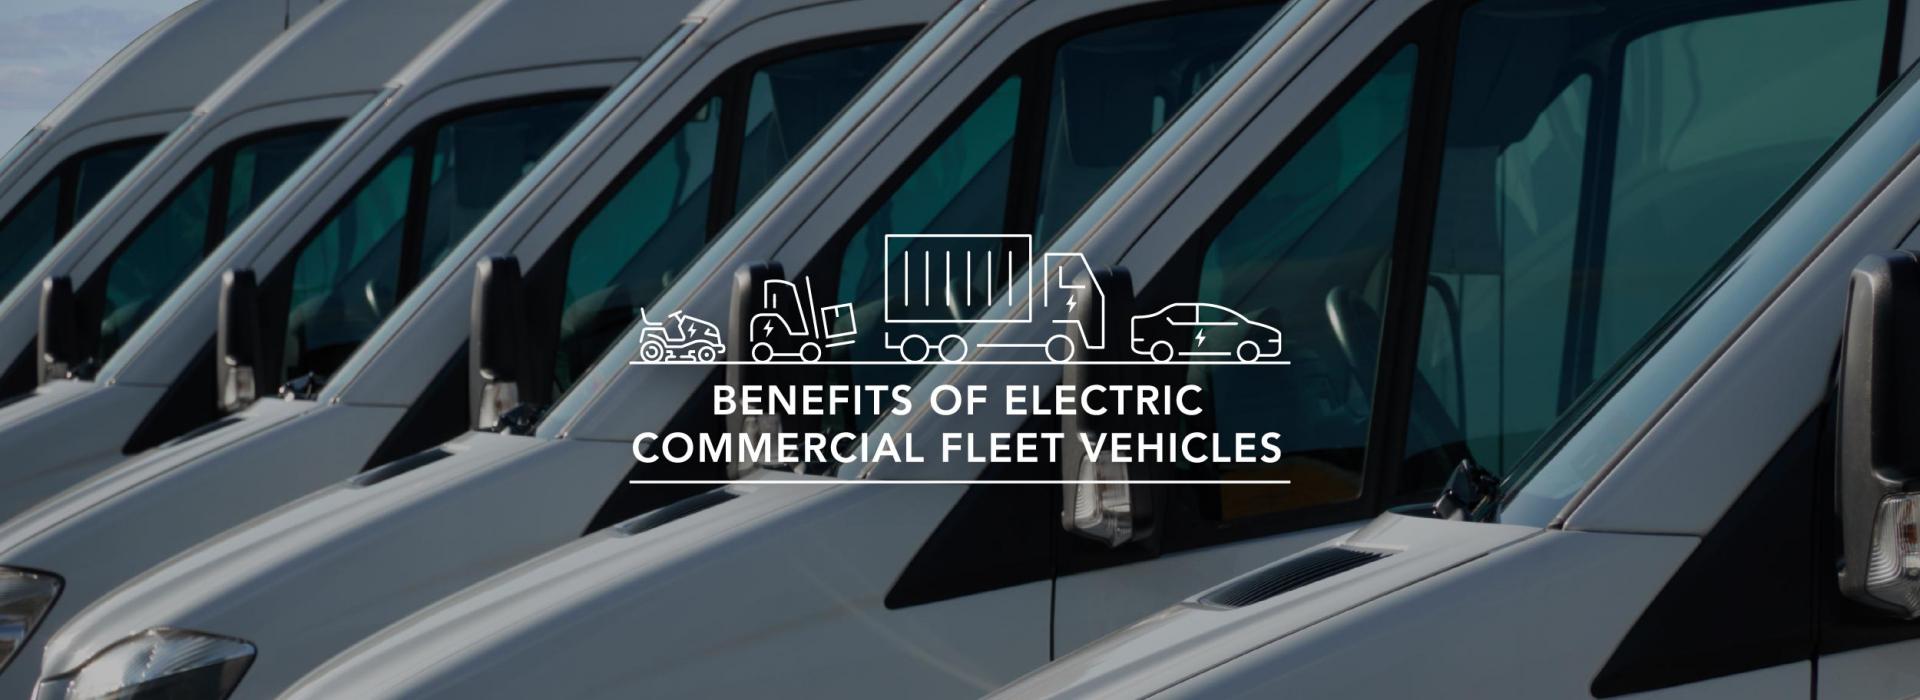 Electric Vehicles for Commercial Fleet